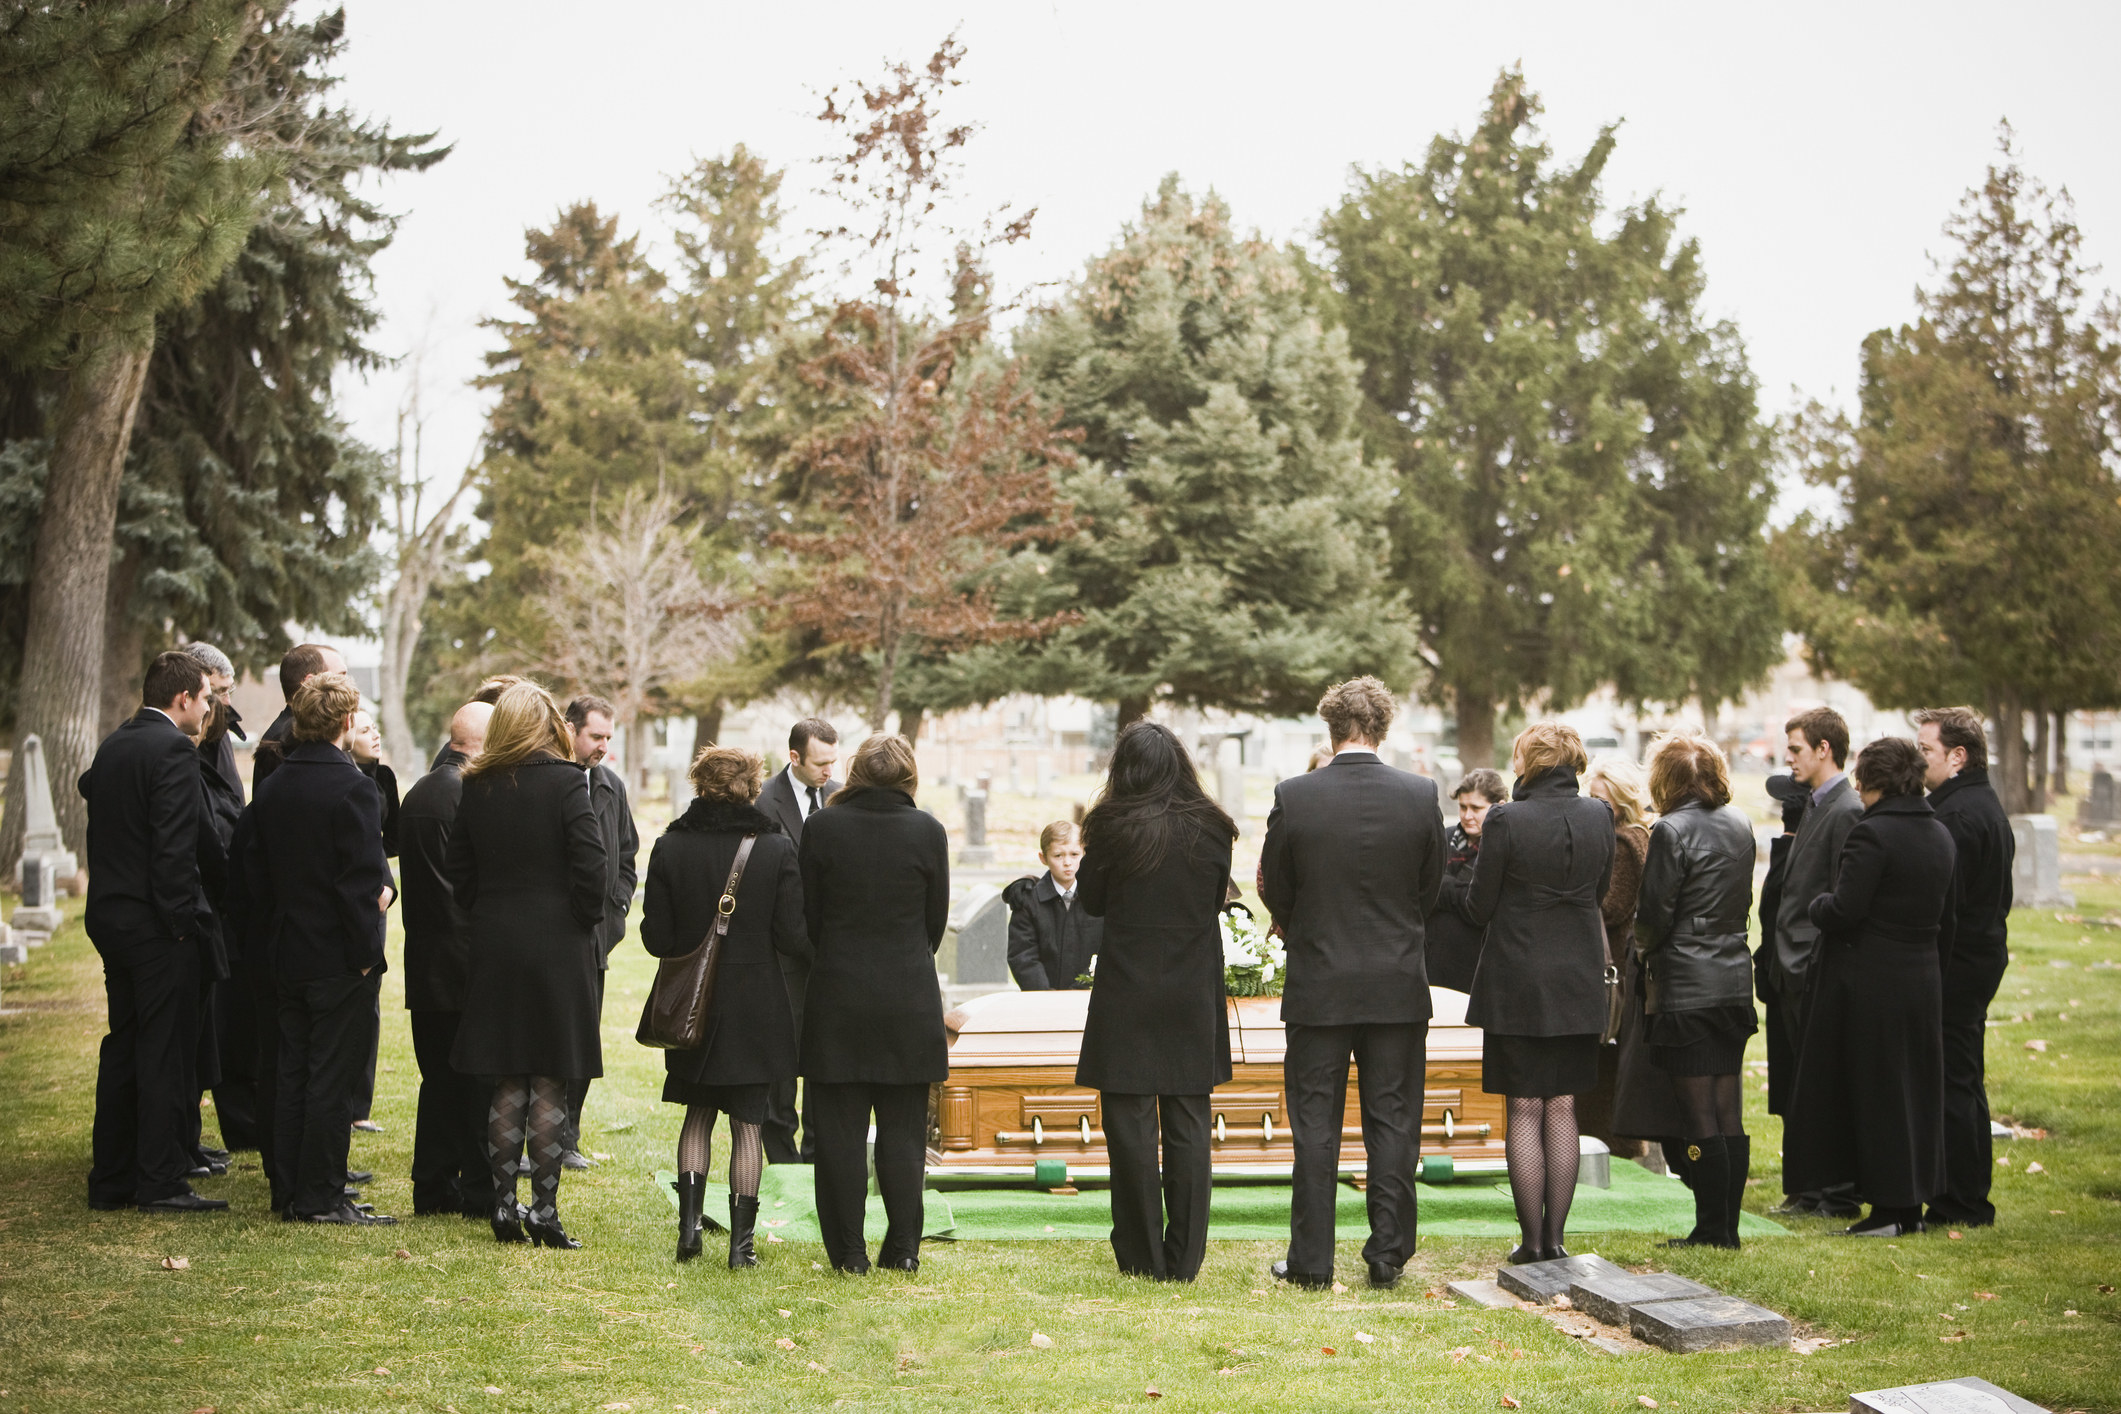 Mourners standing around the grave at a funeral